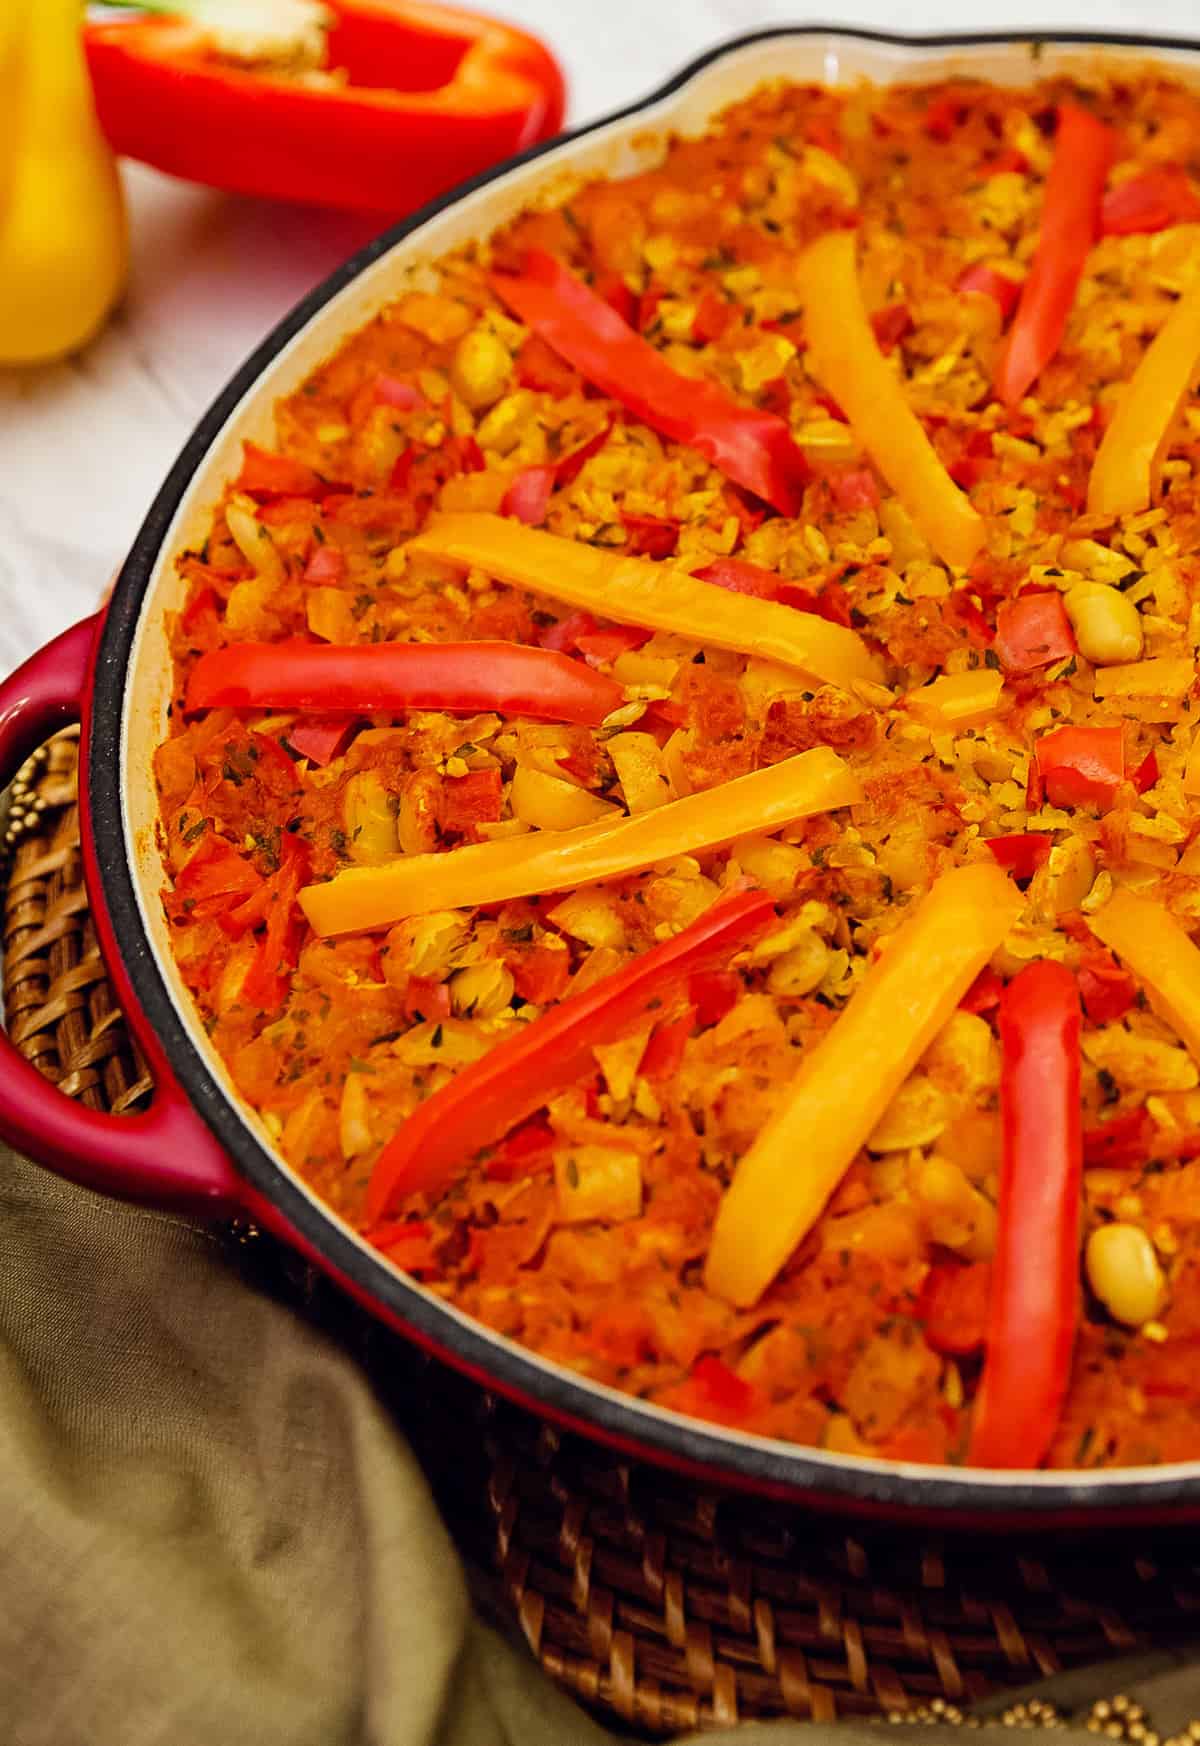 paella, recipe, vegan, vegetarian, whole food plant based, gluten free, oil free, dairy free, wfpb, dinner, lunch, rice, peppers, beans, easy, simple, healthy, no refined sugar, no oil, refined sugar free, entertaining, dinner party, Spanish